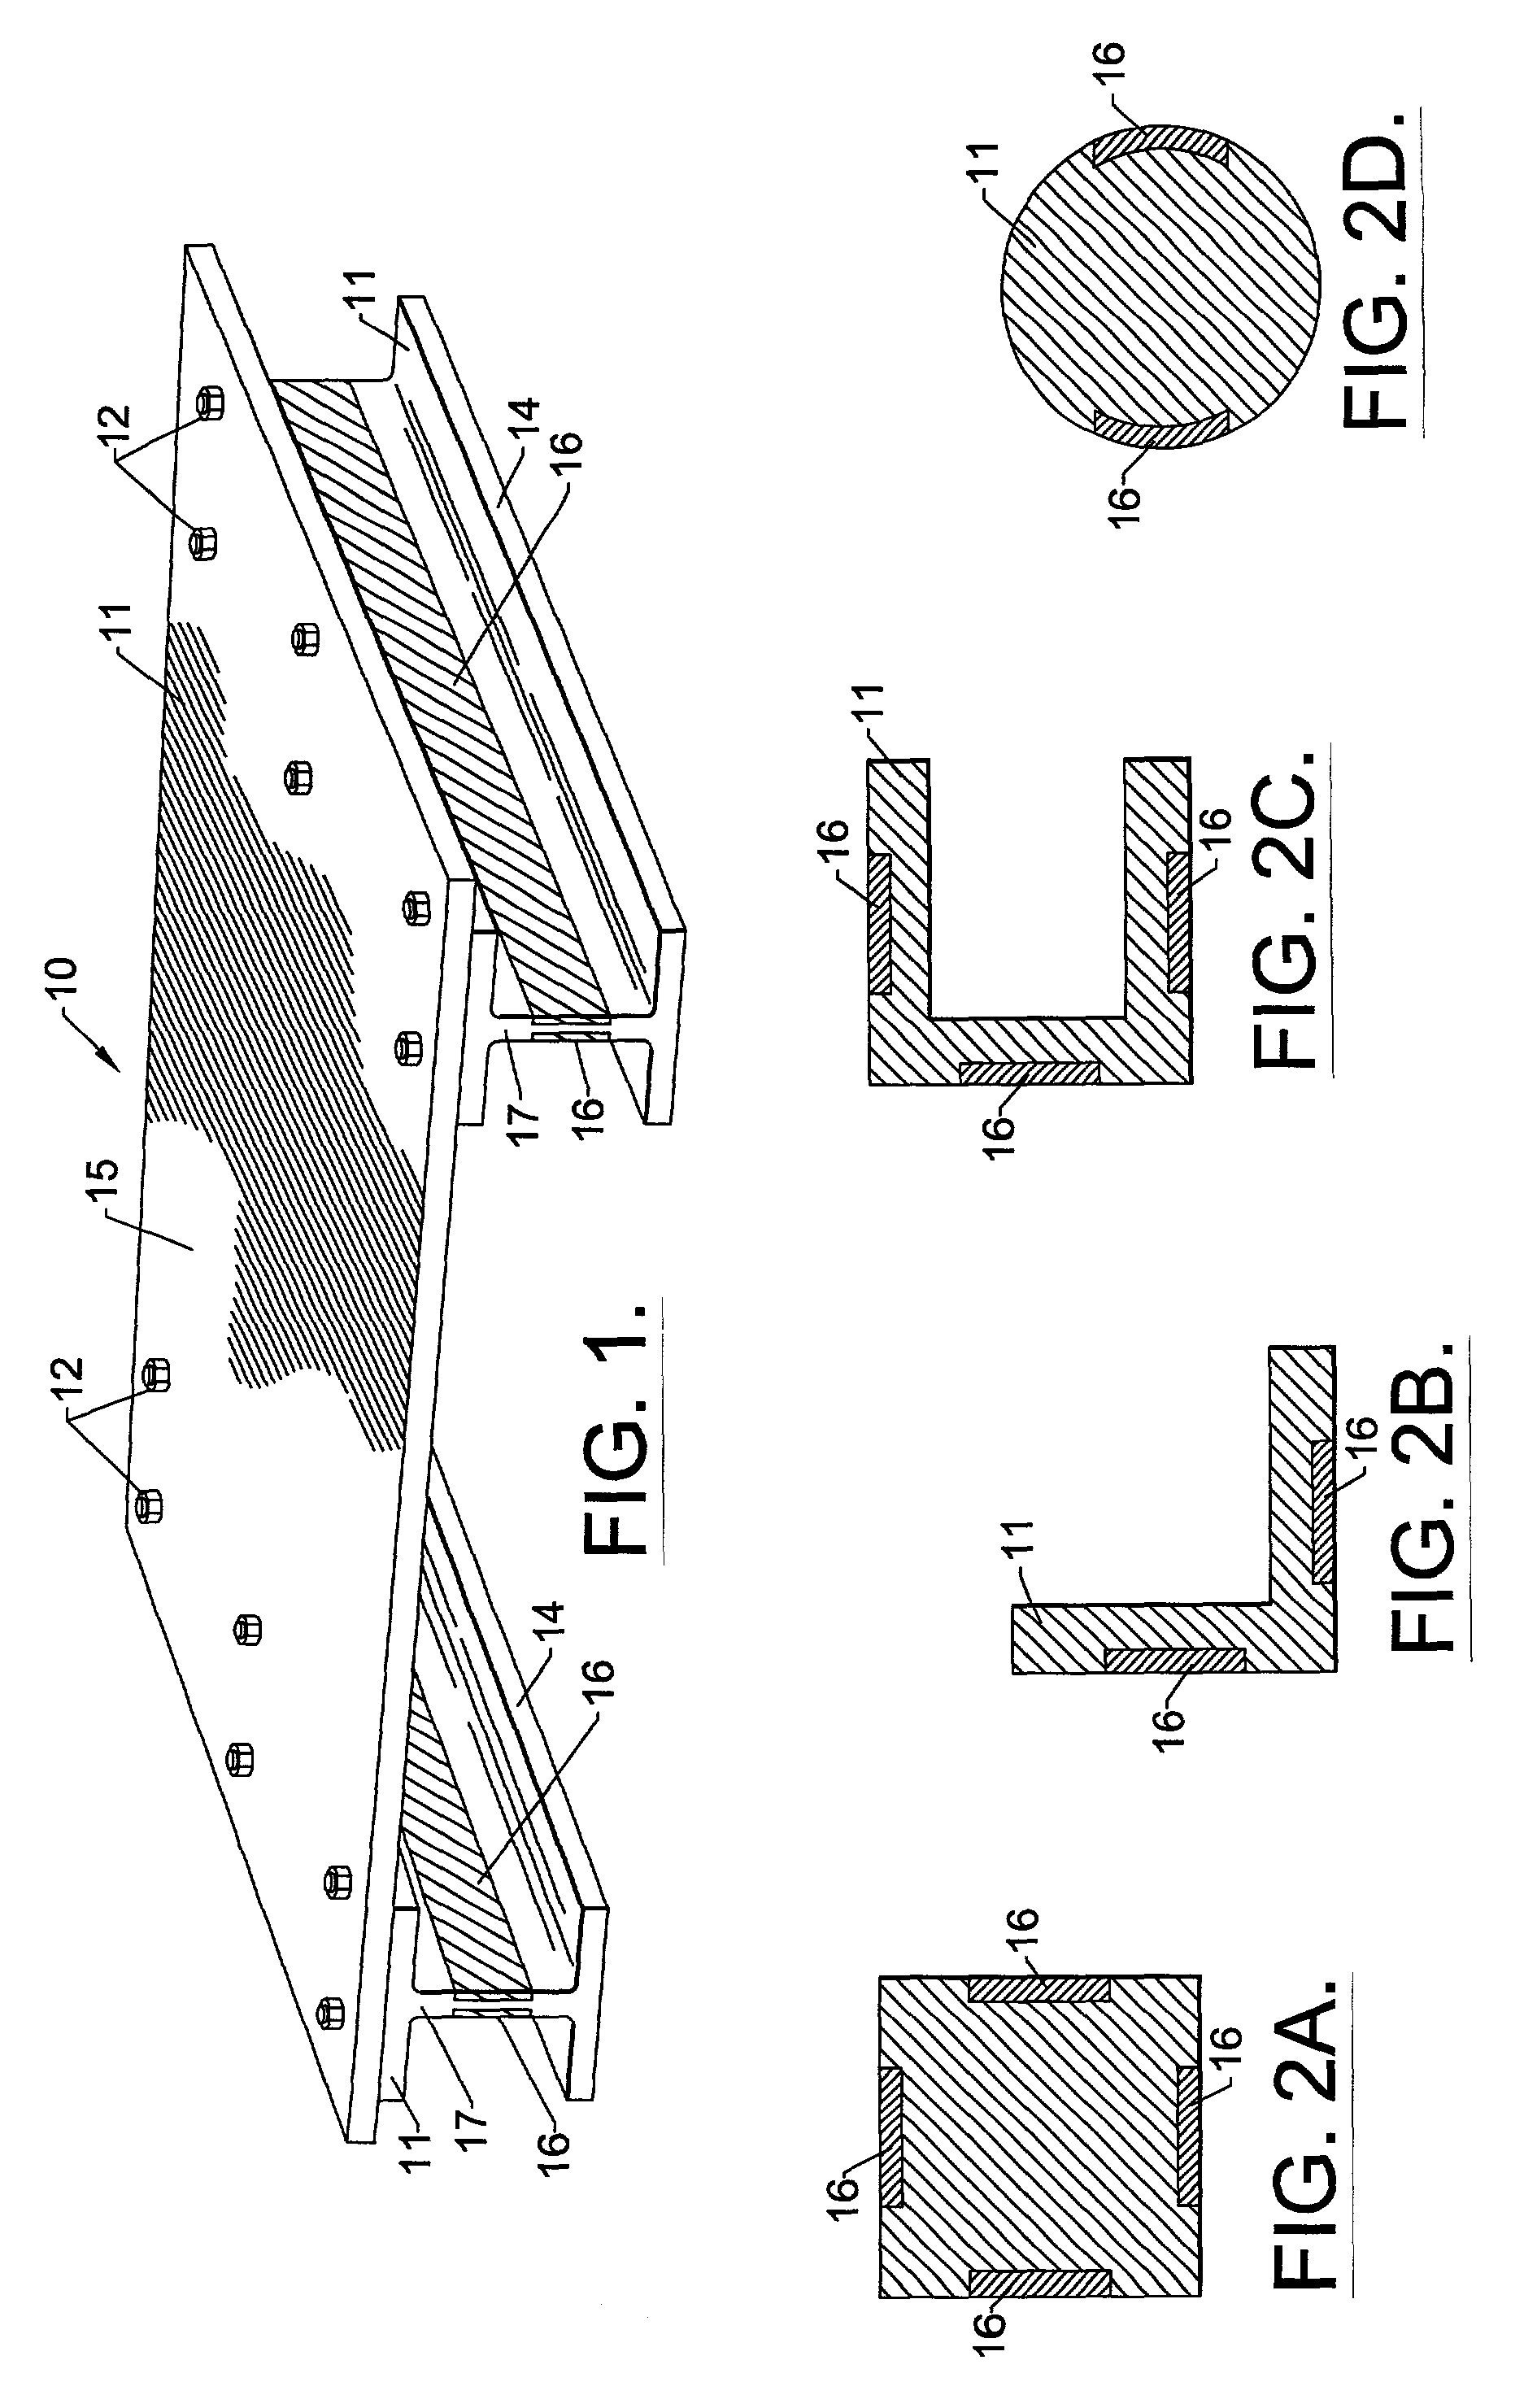 Friction stir grain refinement of structural members